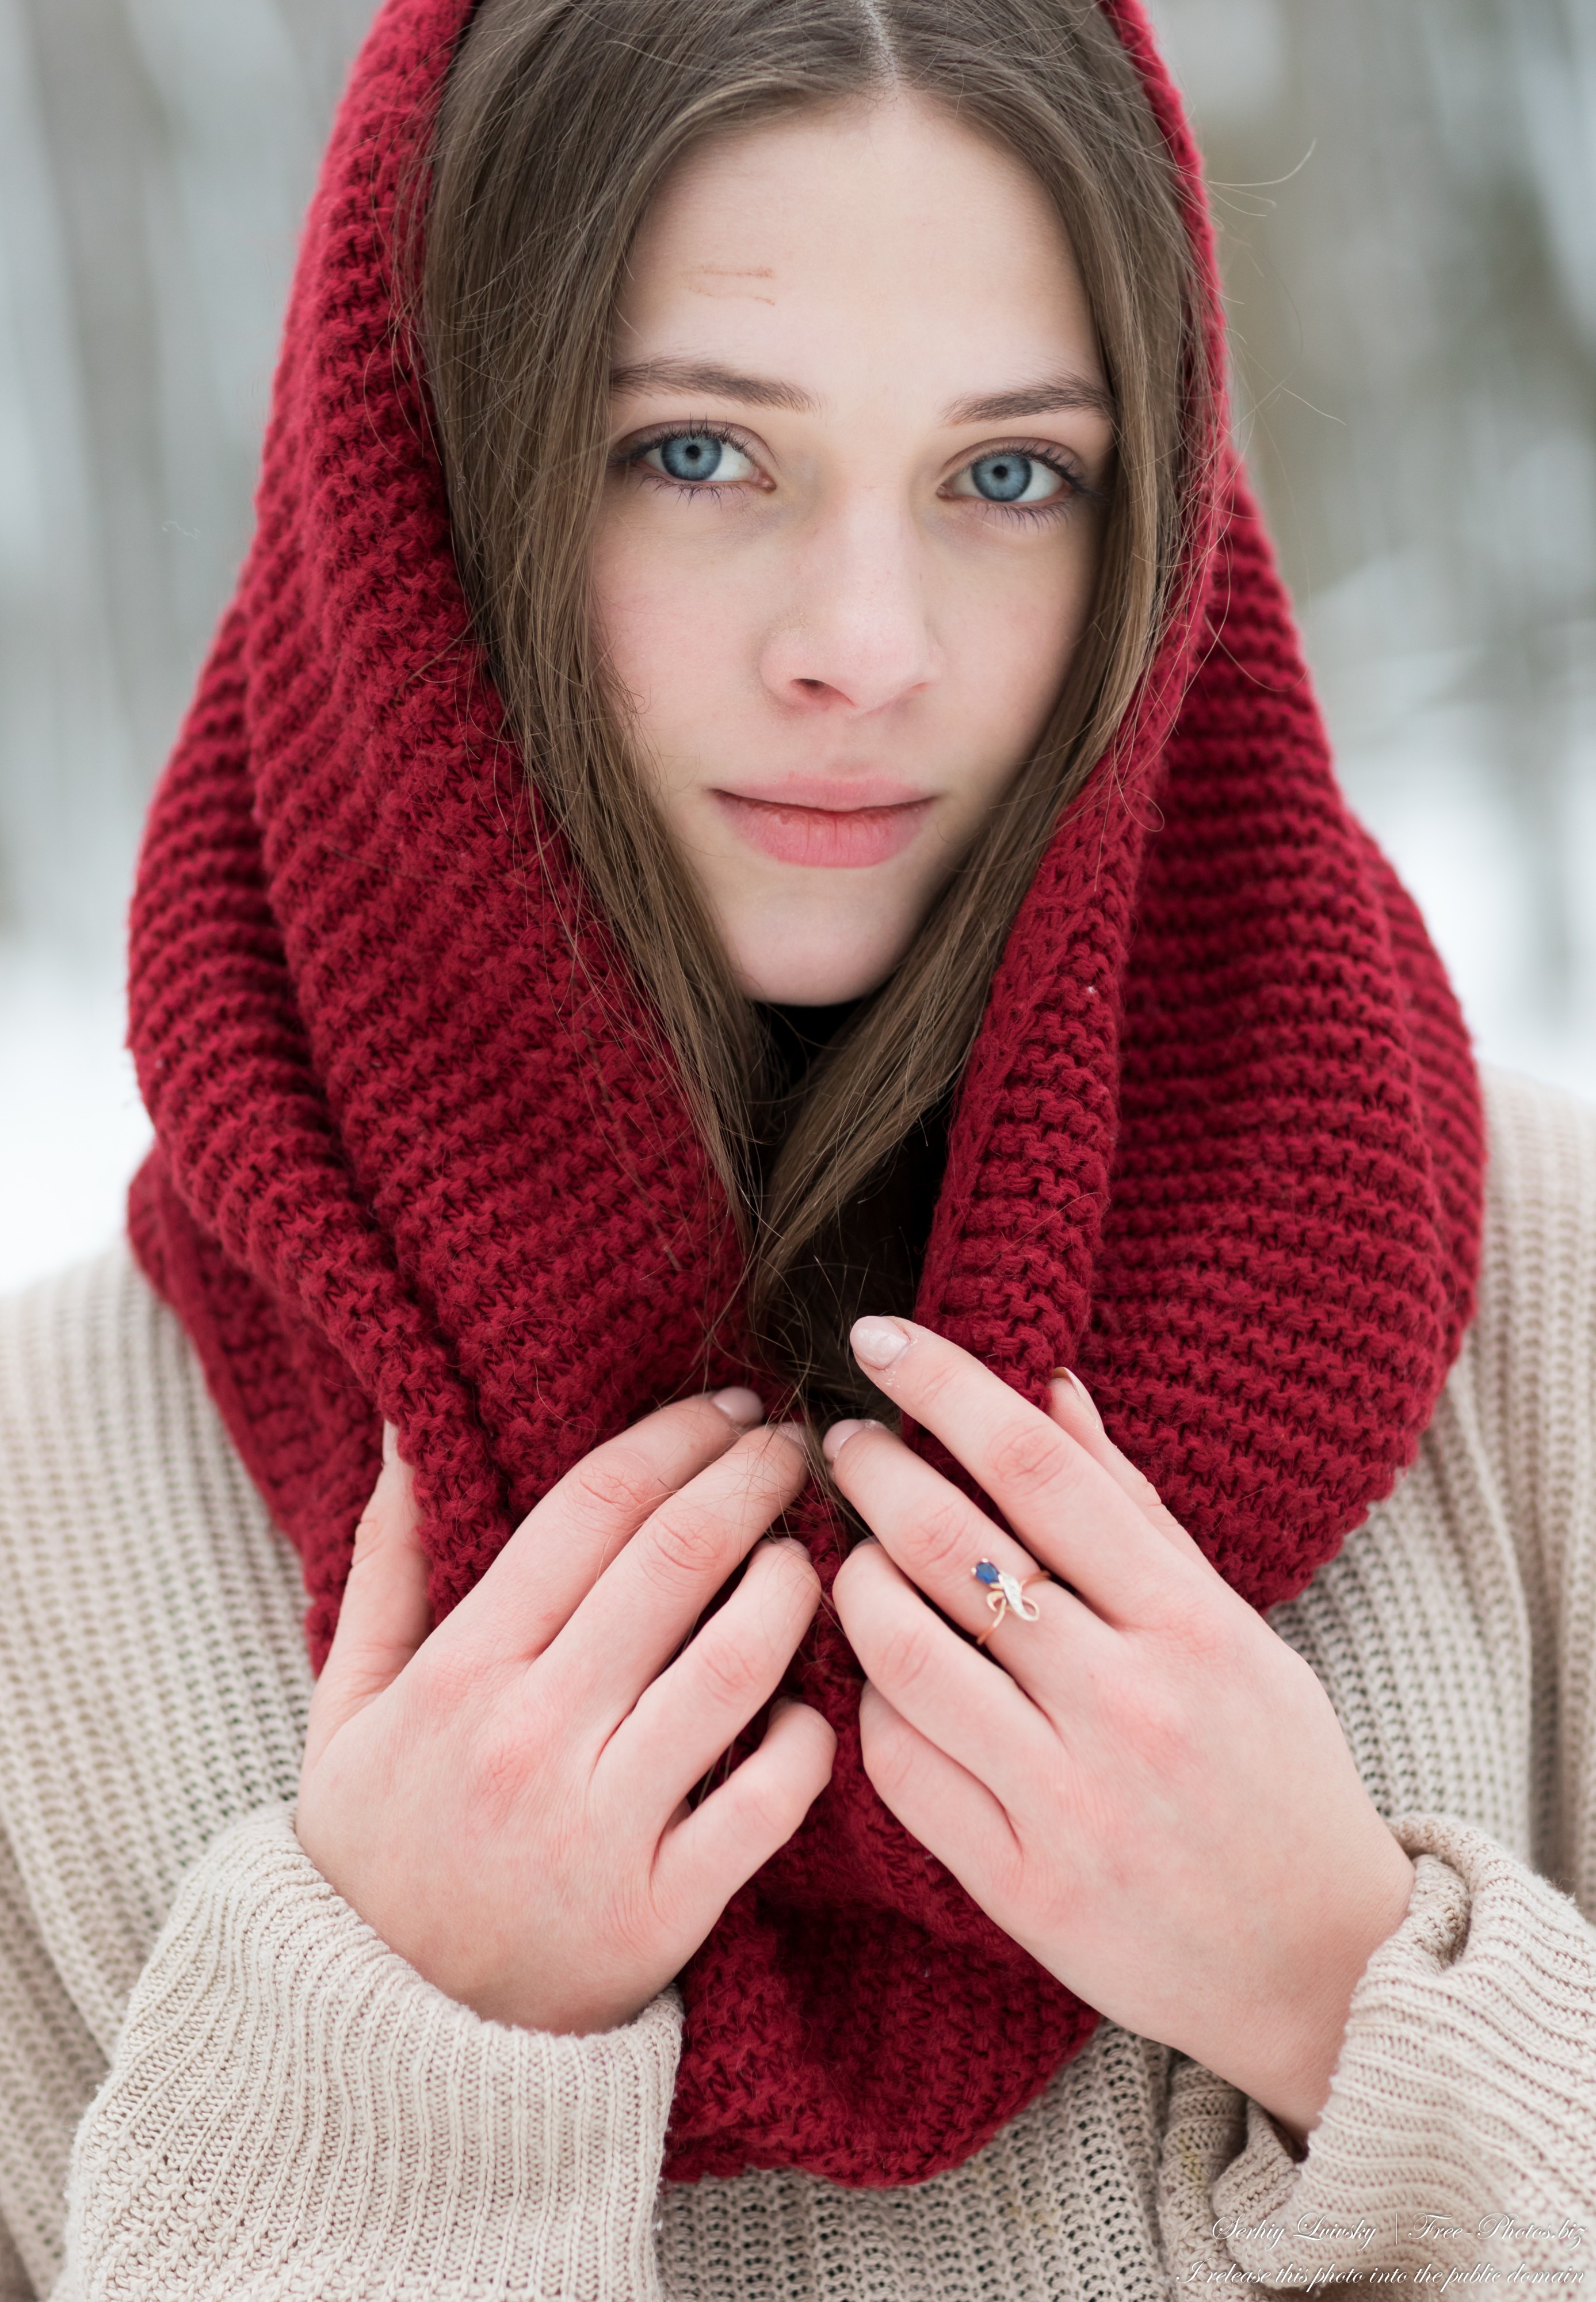 Sophia - a 17-year-old girl with blue eyes photographed by Serhiy Lvivsky in January 2022, picture 21